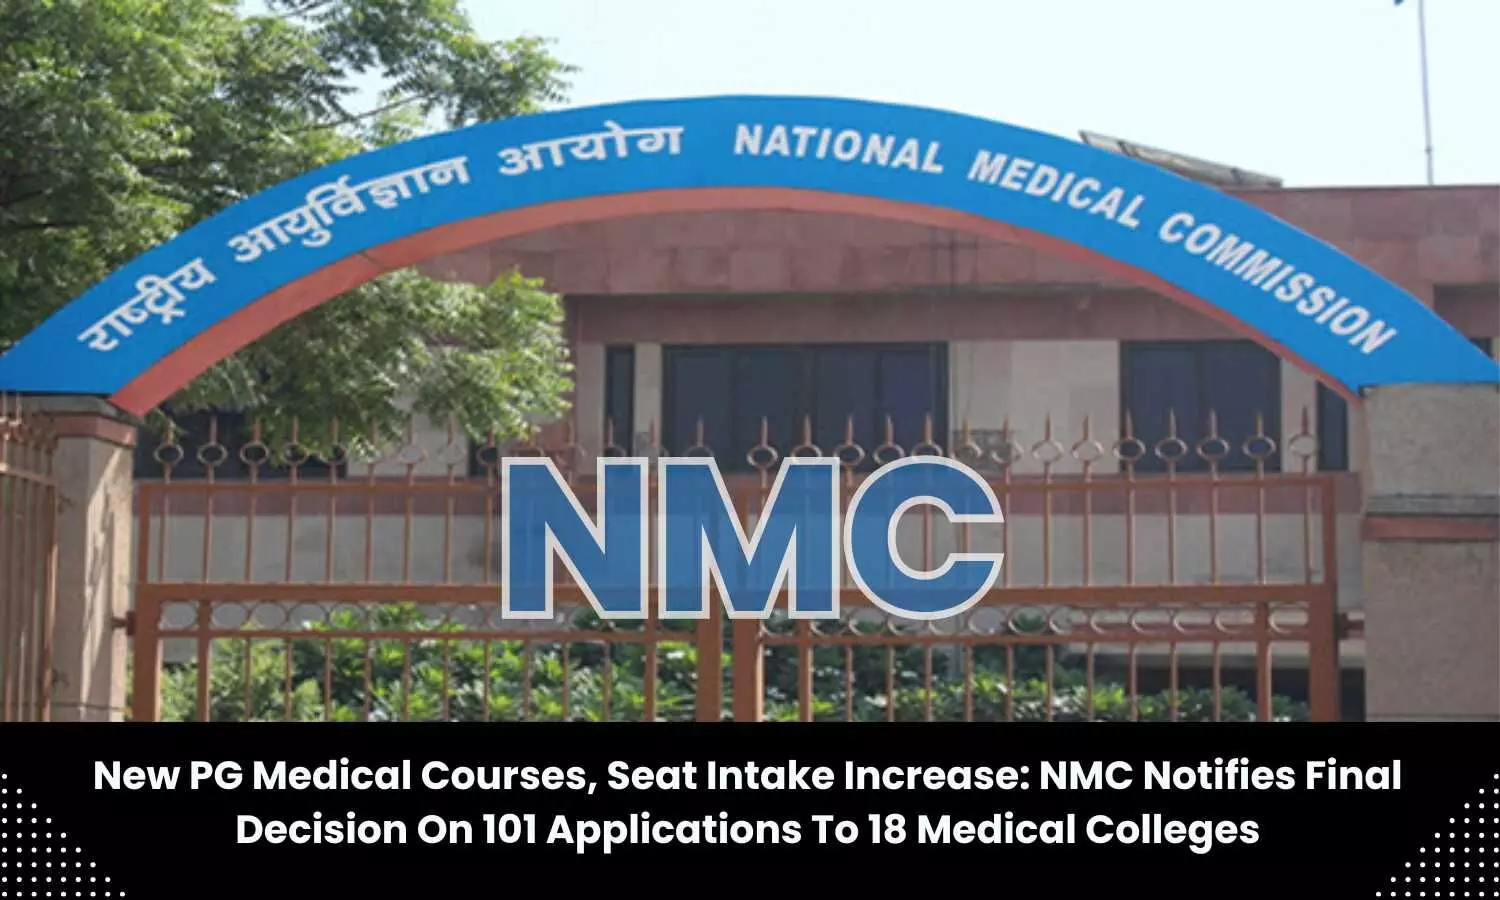 NMC notifies final decision to 18 medical colleges on 101 applications to start new PG medical courses, seat increase